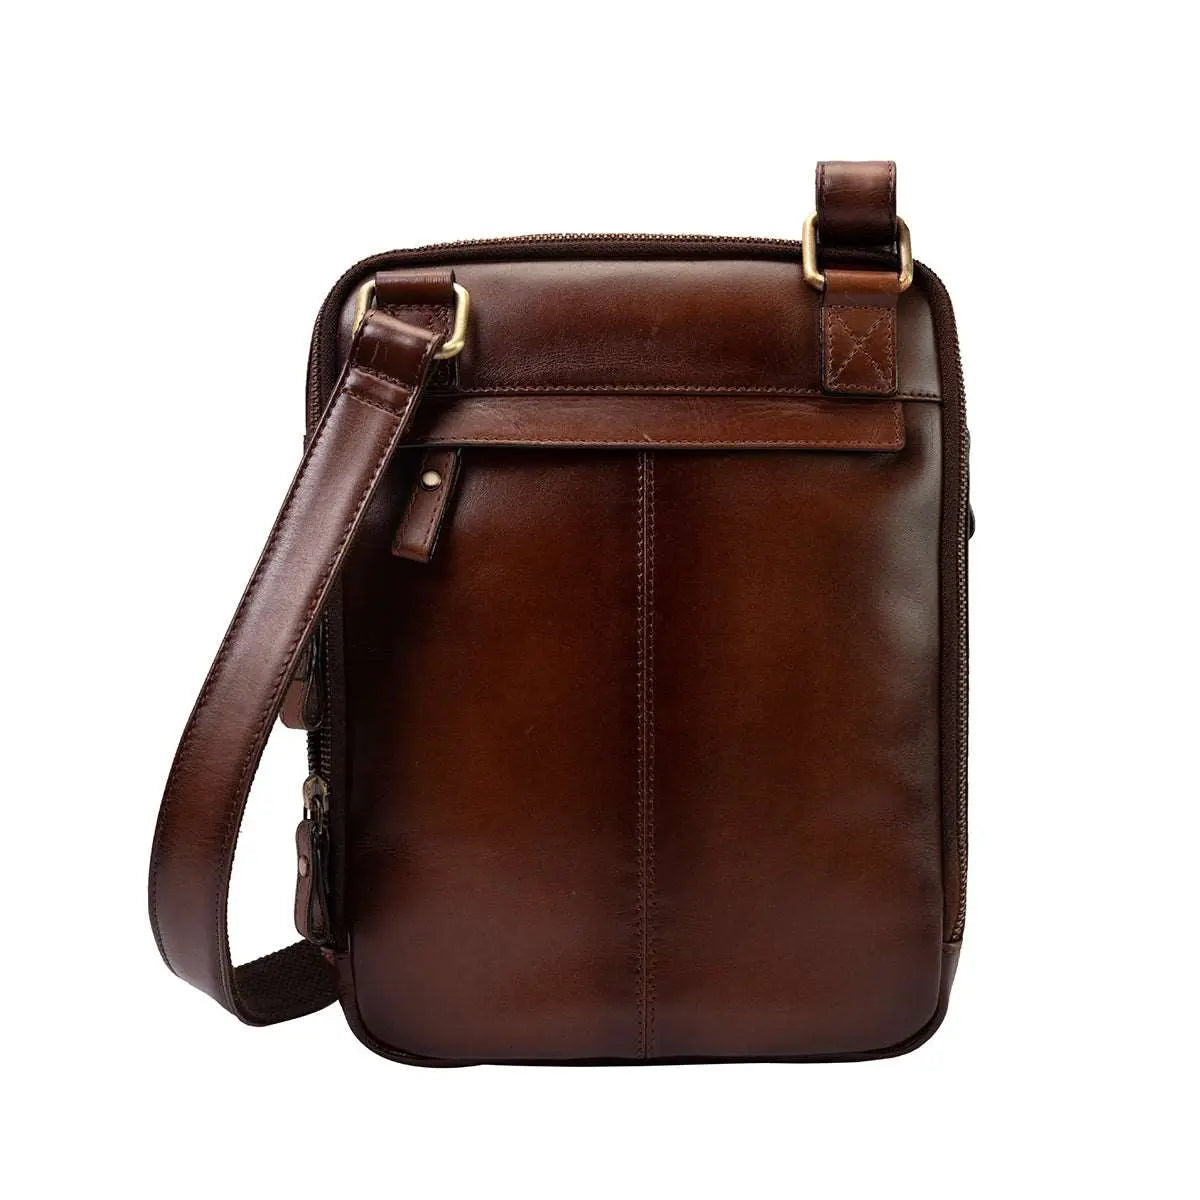 Manhattan Messenger Bag for I-Pad in Genuine Leather - Brown Bear